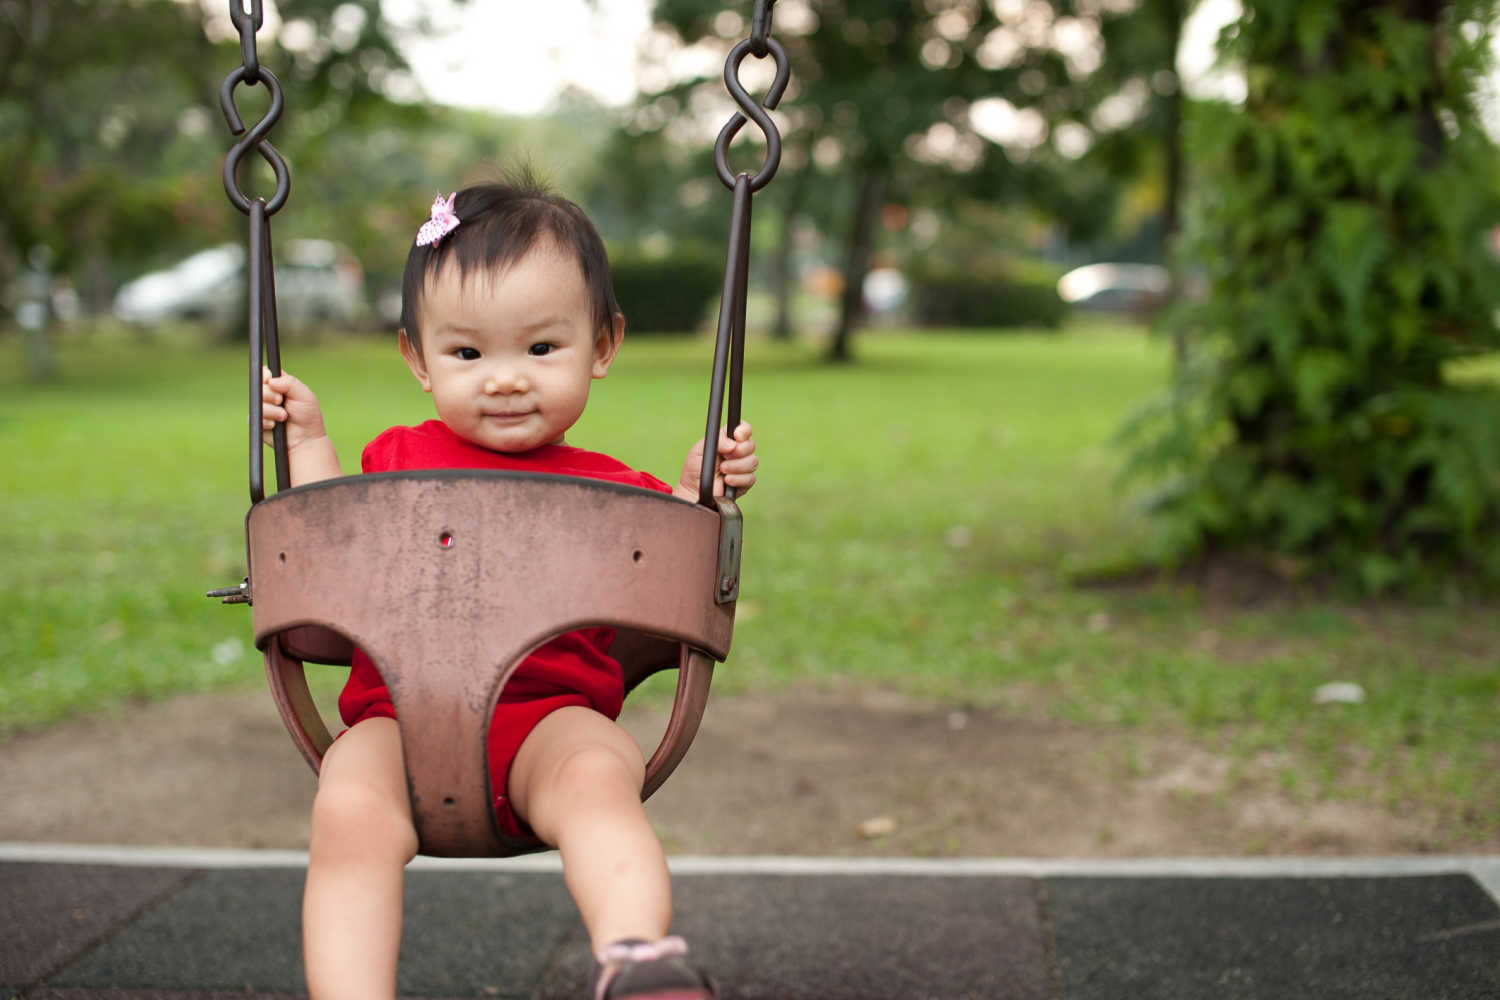 When Should You Introduce Baby Swings to Your Baby?